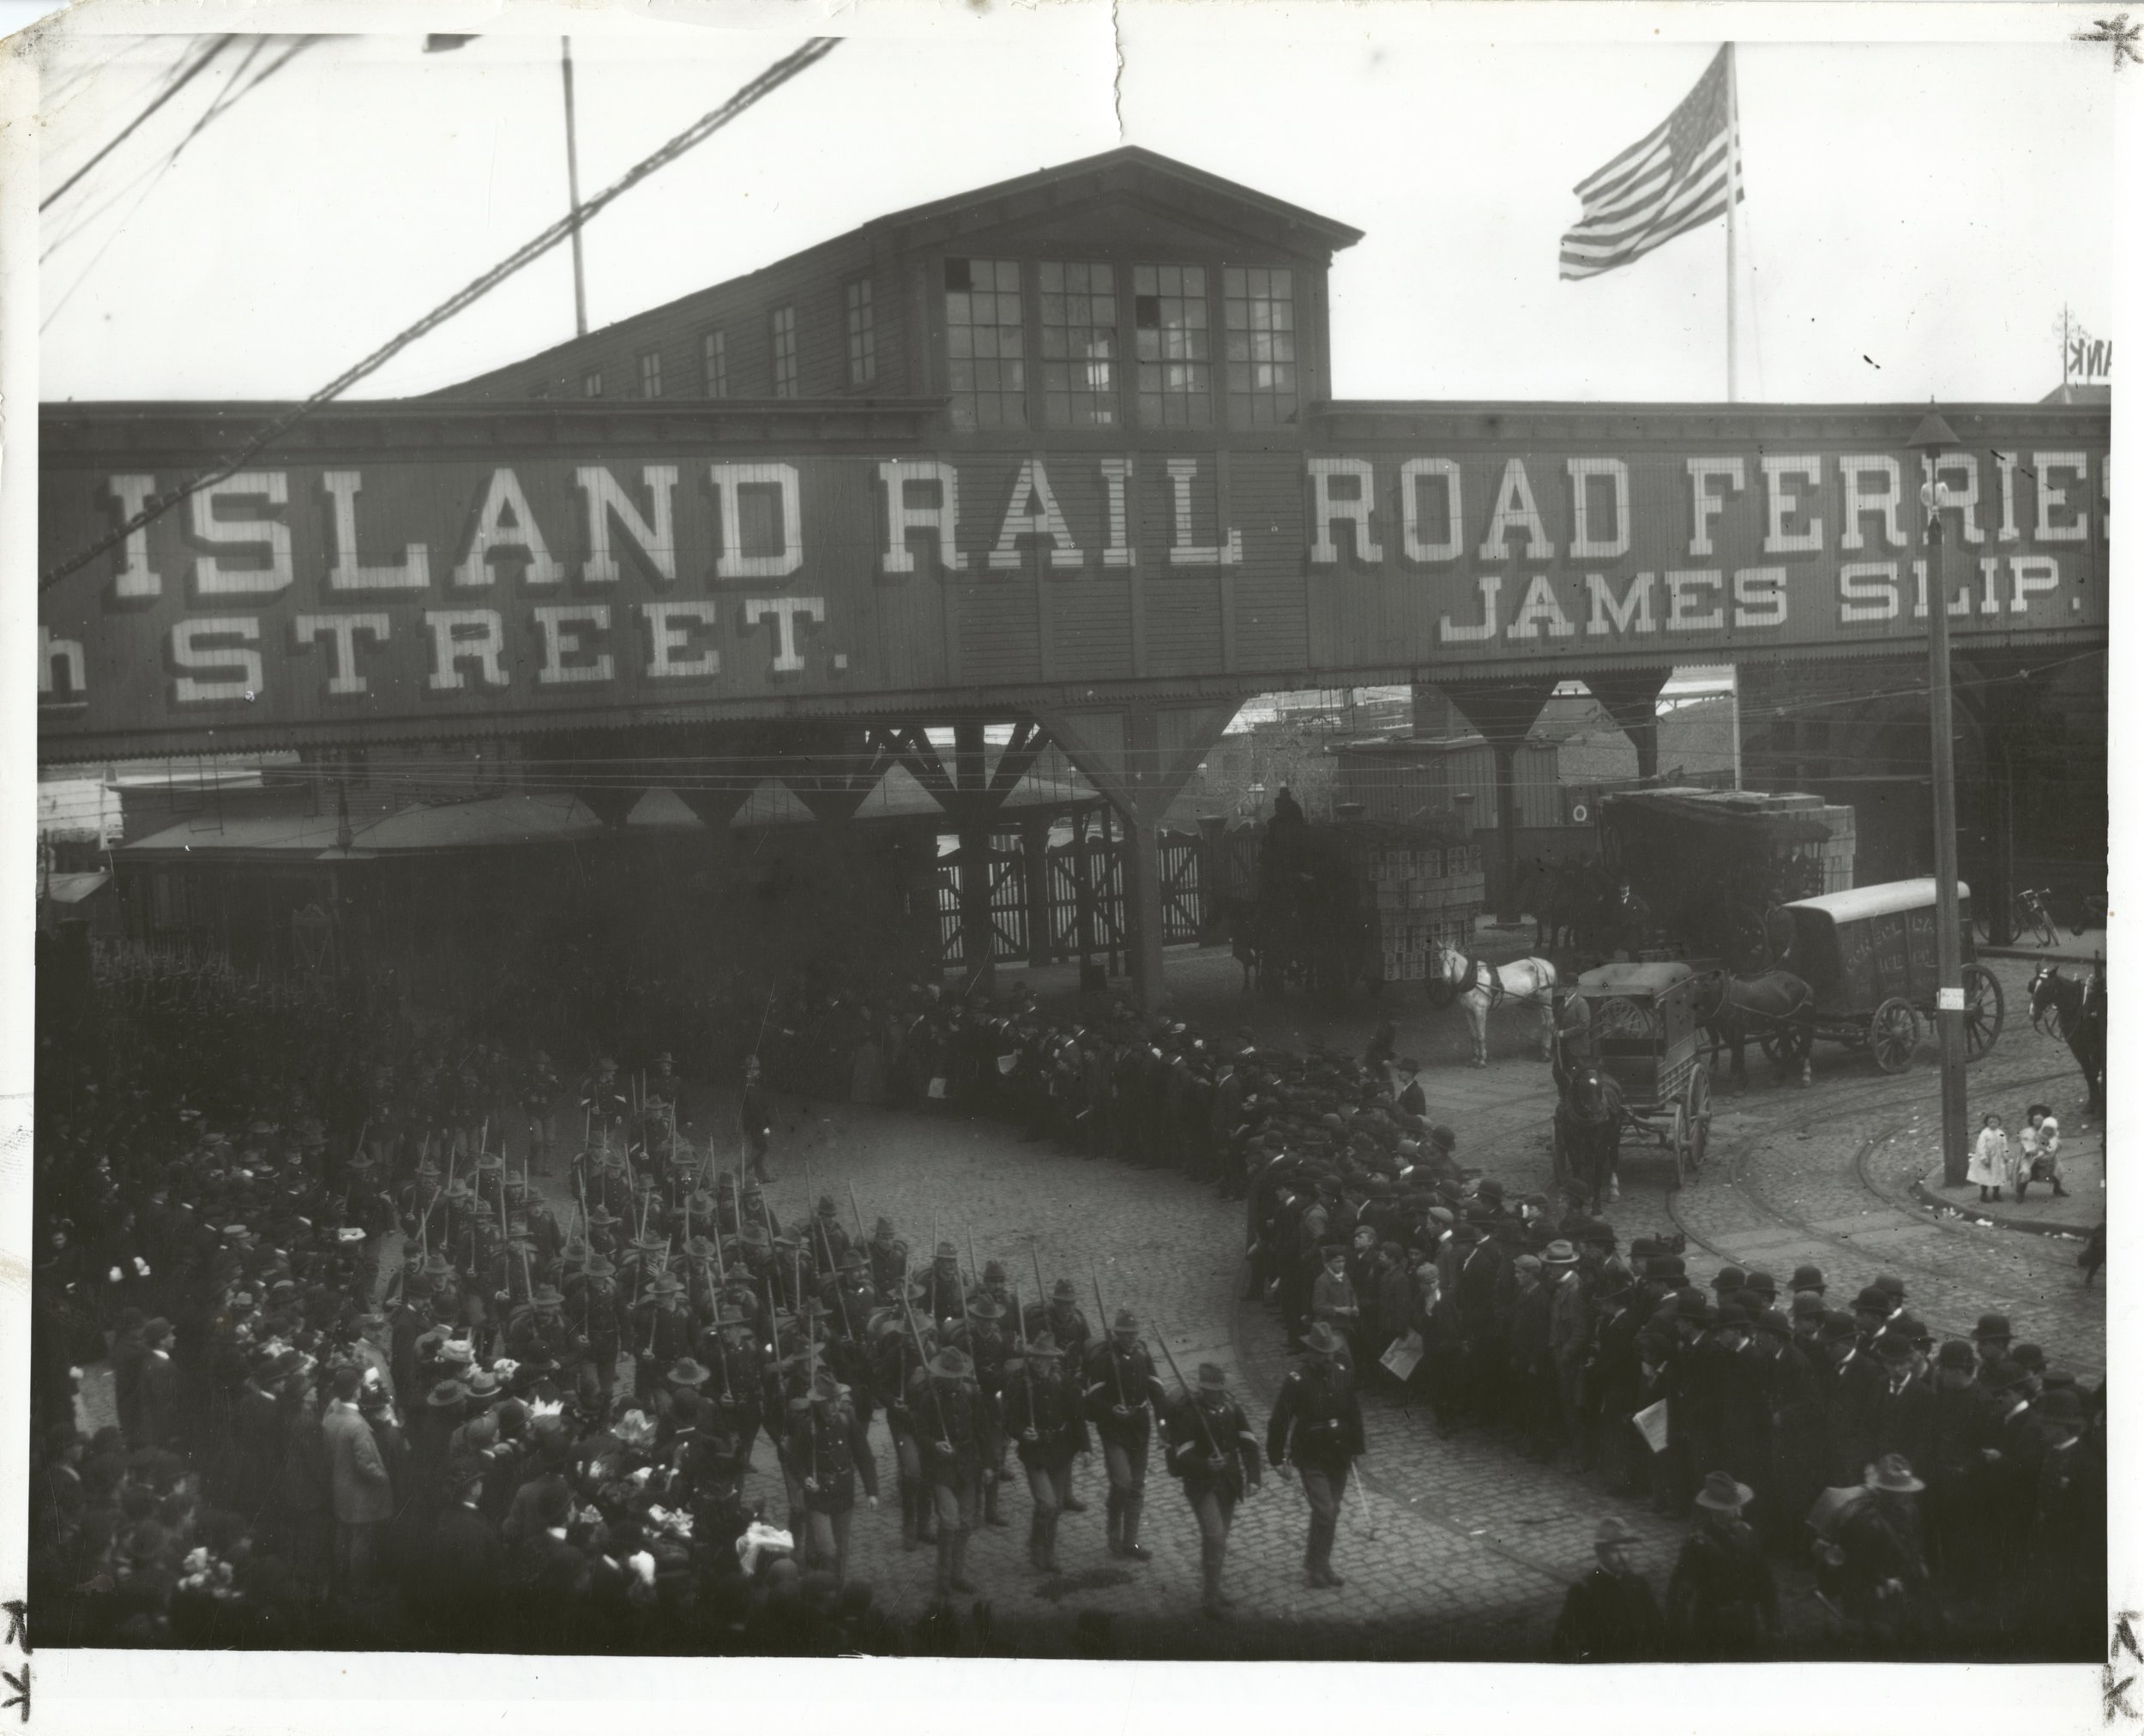  Spanish-American War Veterans at Long Island City Ferry Terminal on their return from Cuba, entraining for Long Island camps, 1898. Hal B. Fullerton. Courtesy Queens Borough Public Library. 